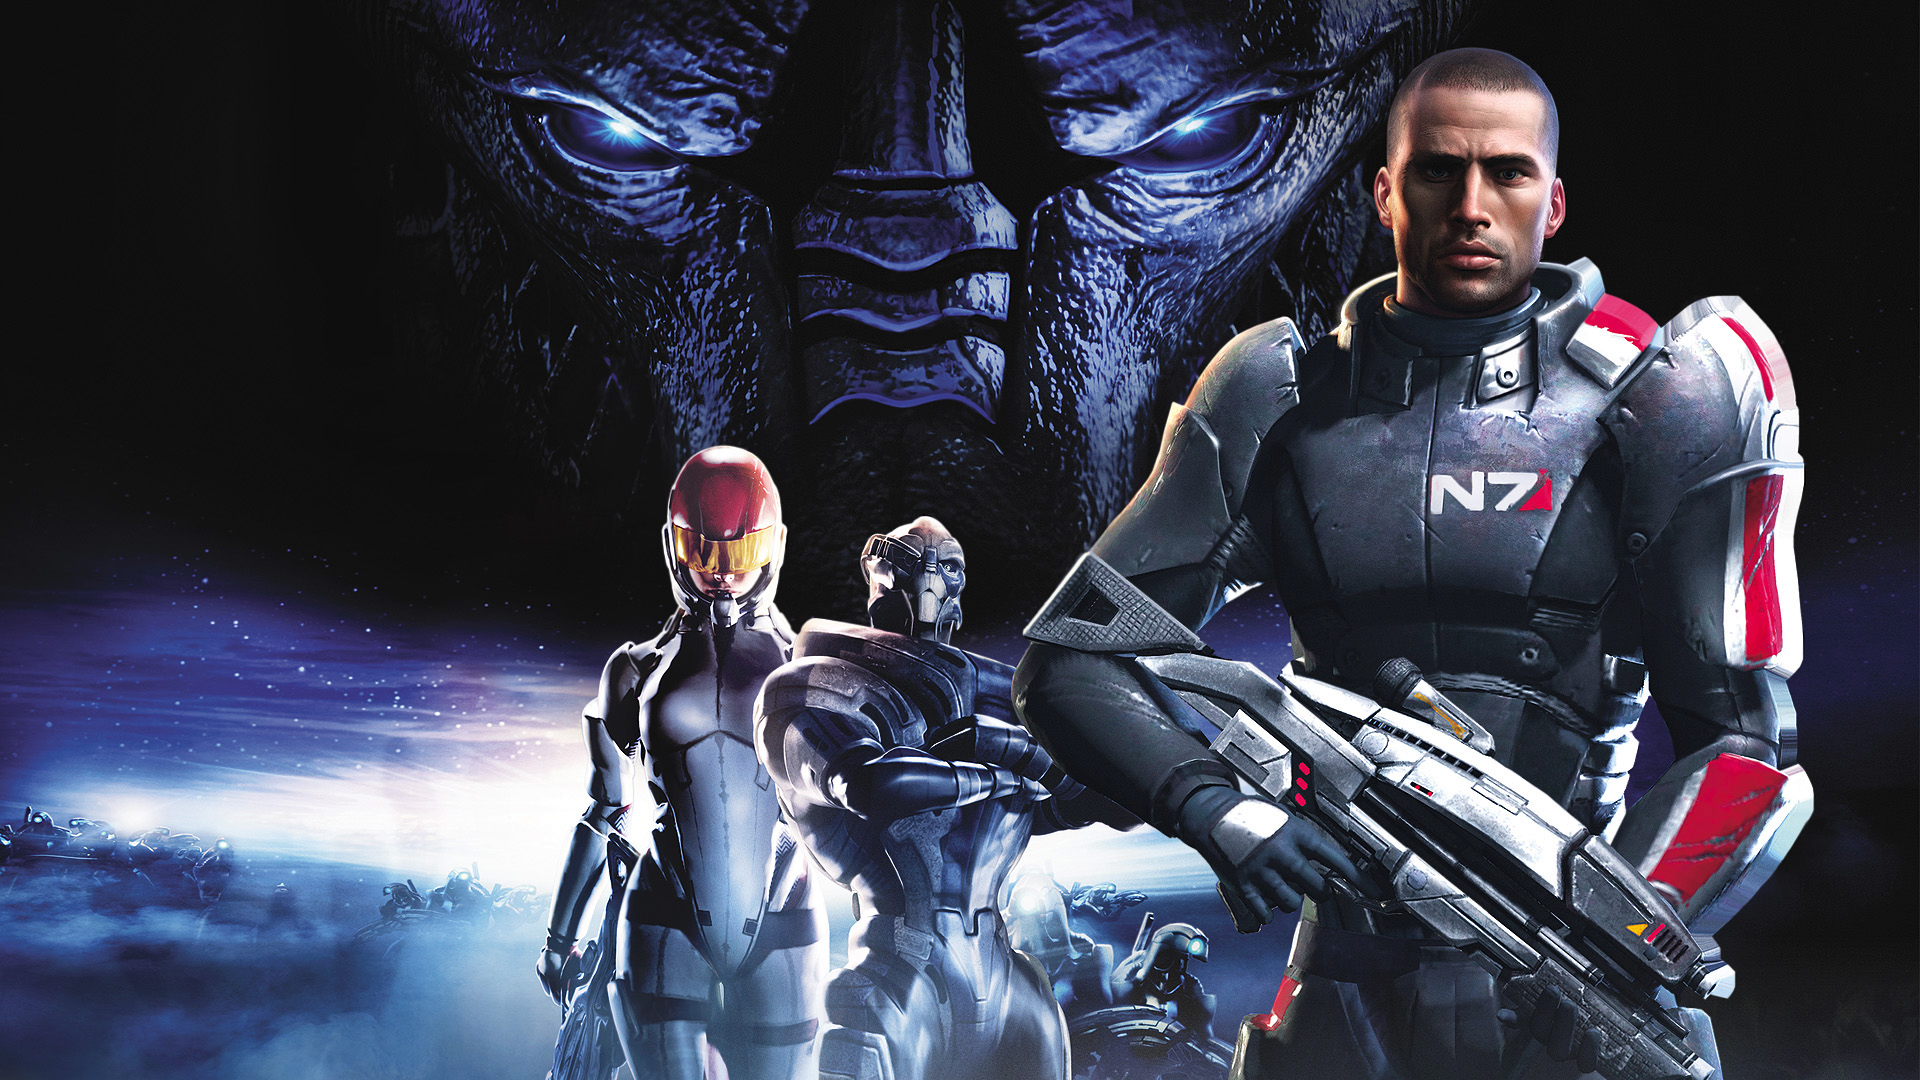 How Could Mass Effect Be Adapted Into A Movie?